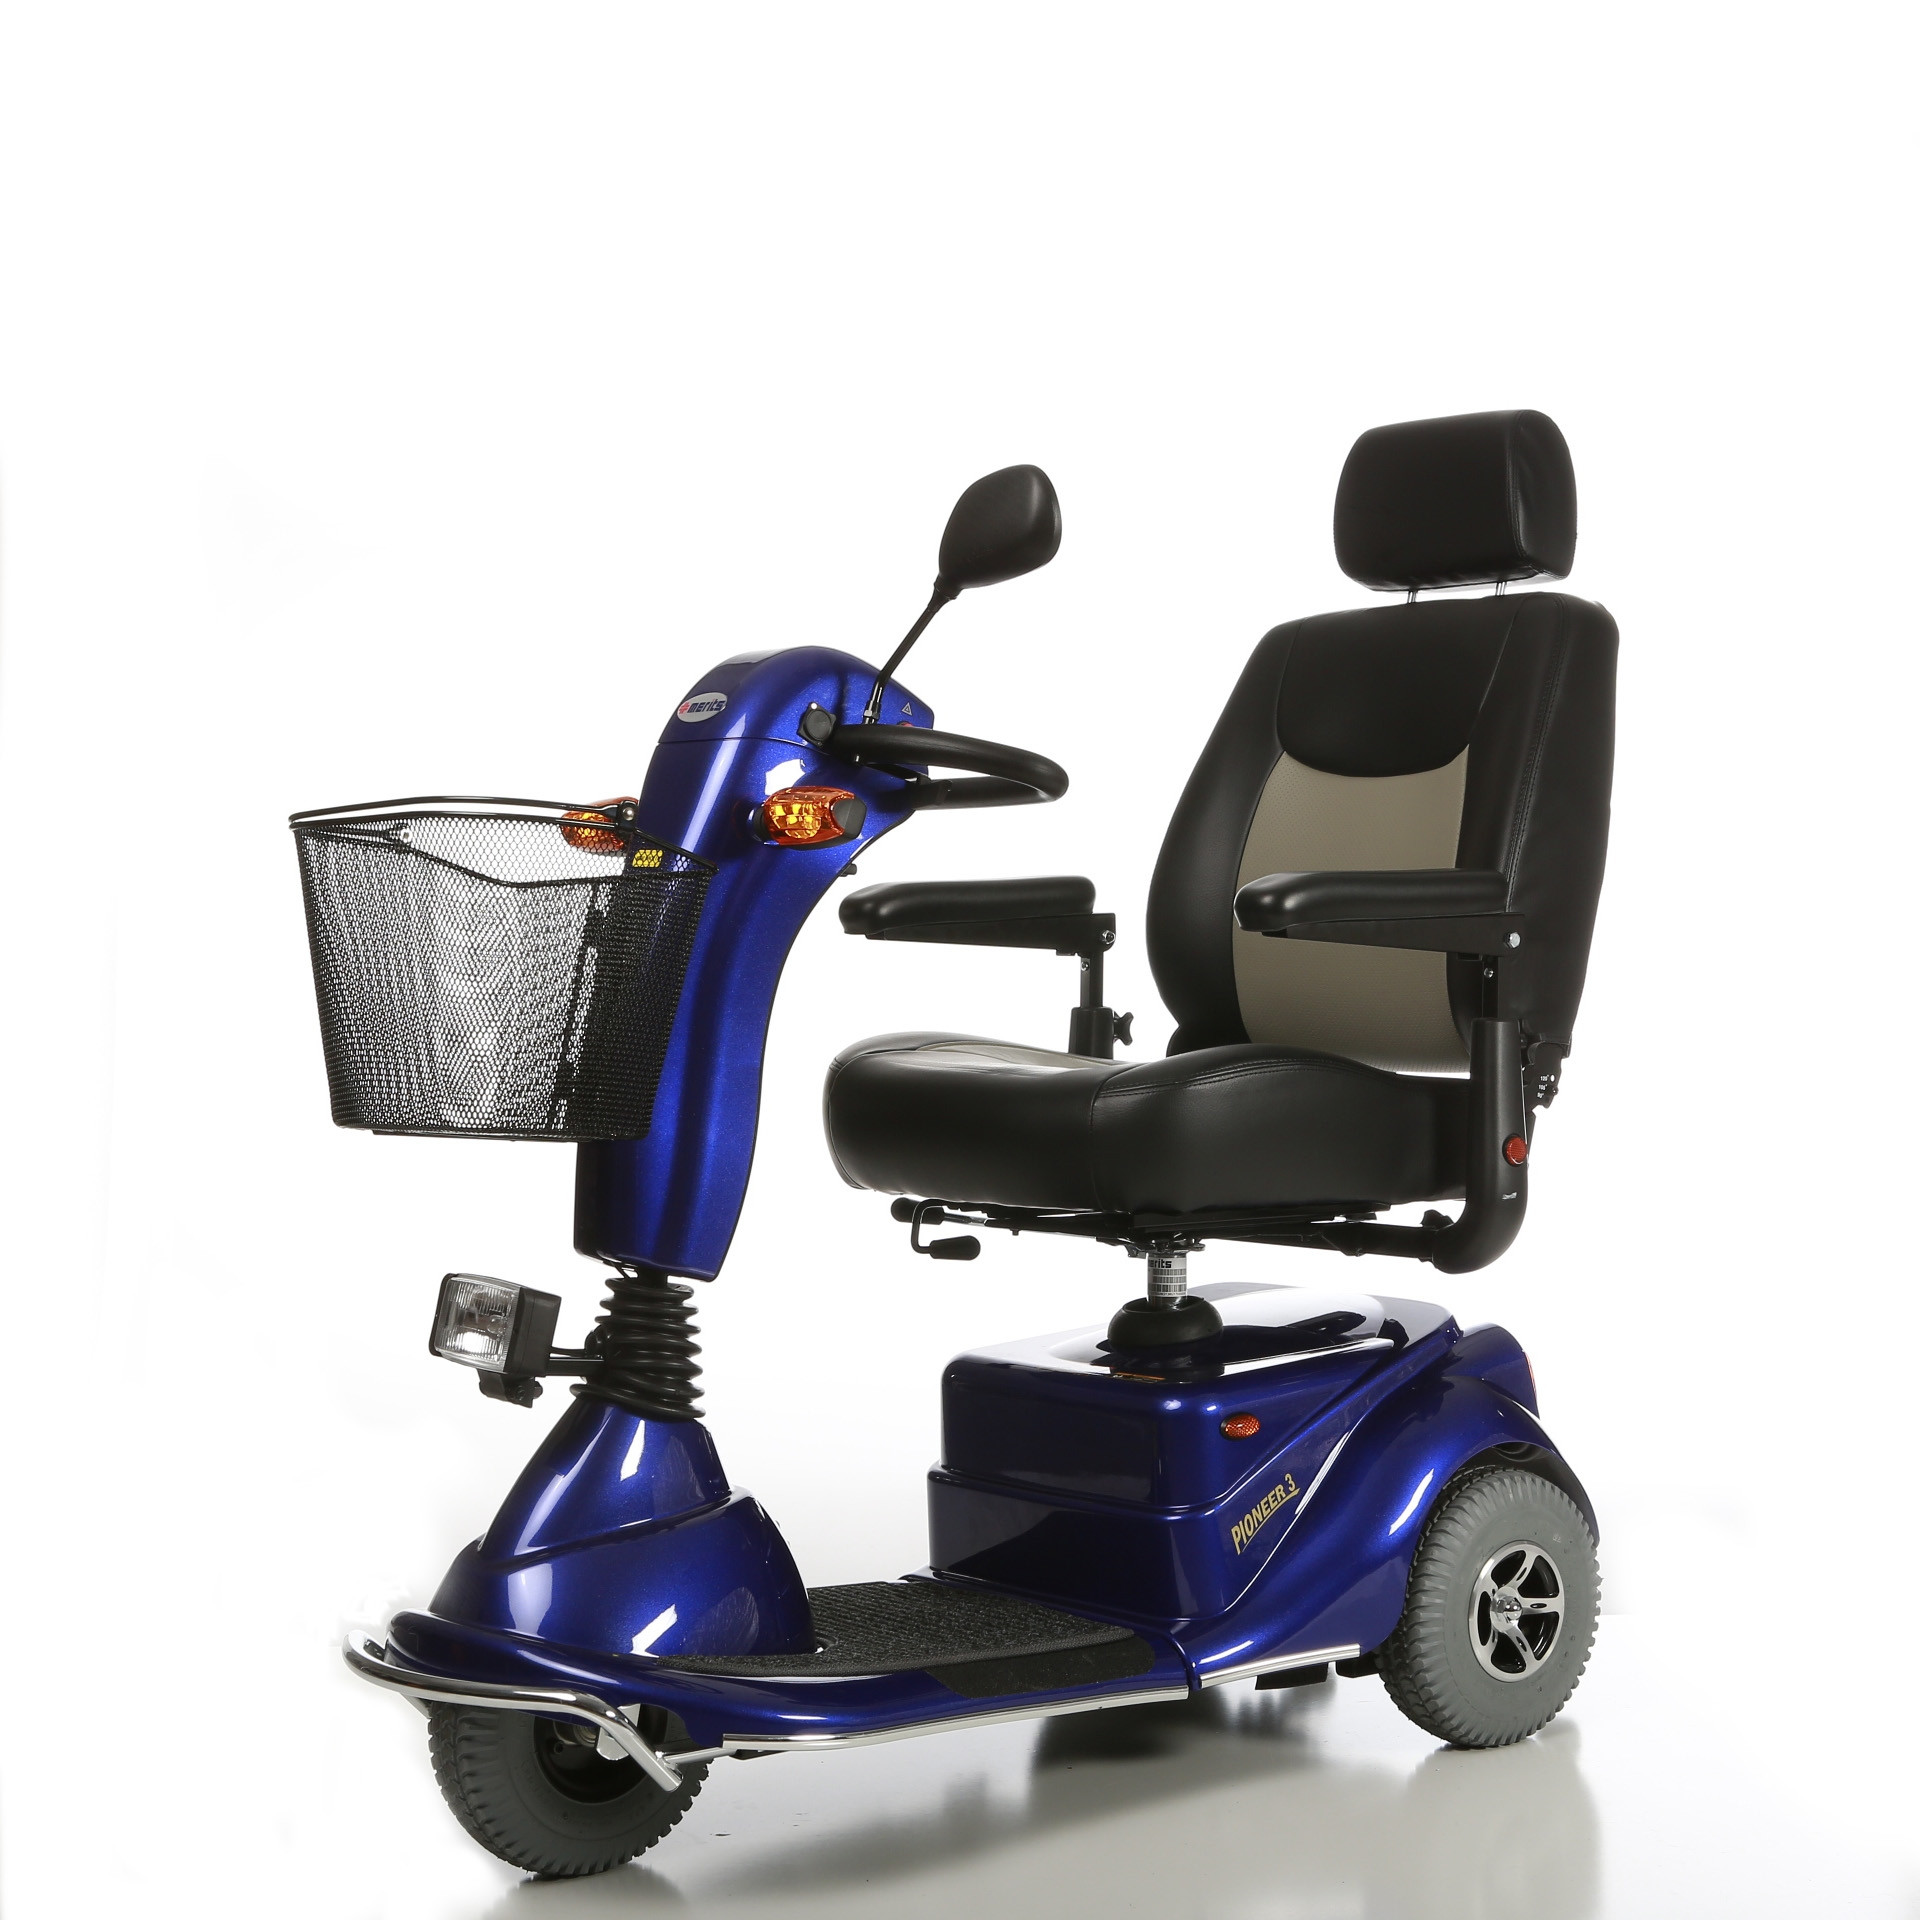 Merits Health S131 Pioneer 3 3 Wheel Mobility Scooter Tax